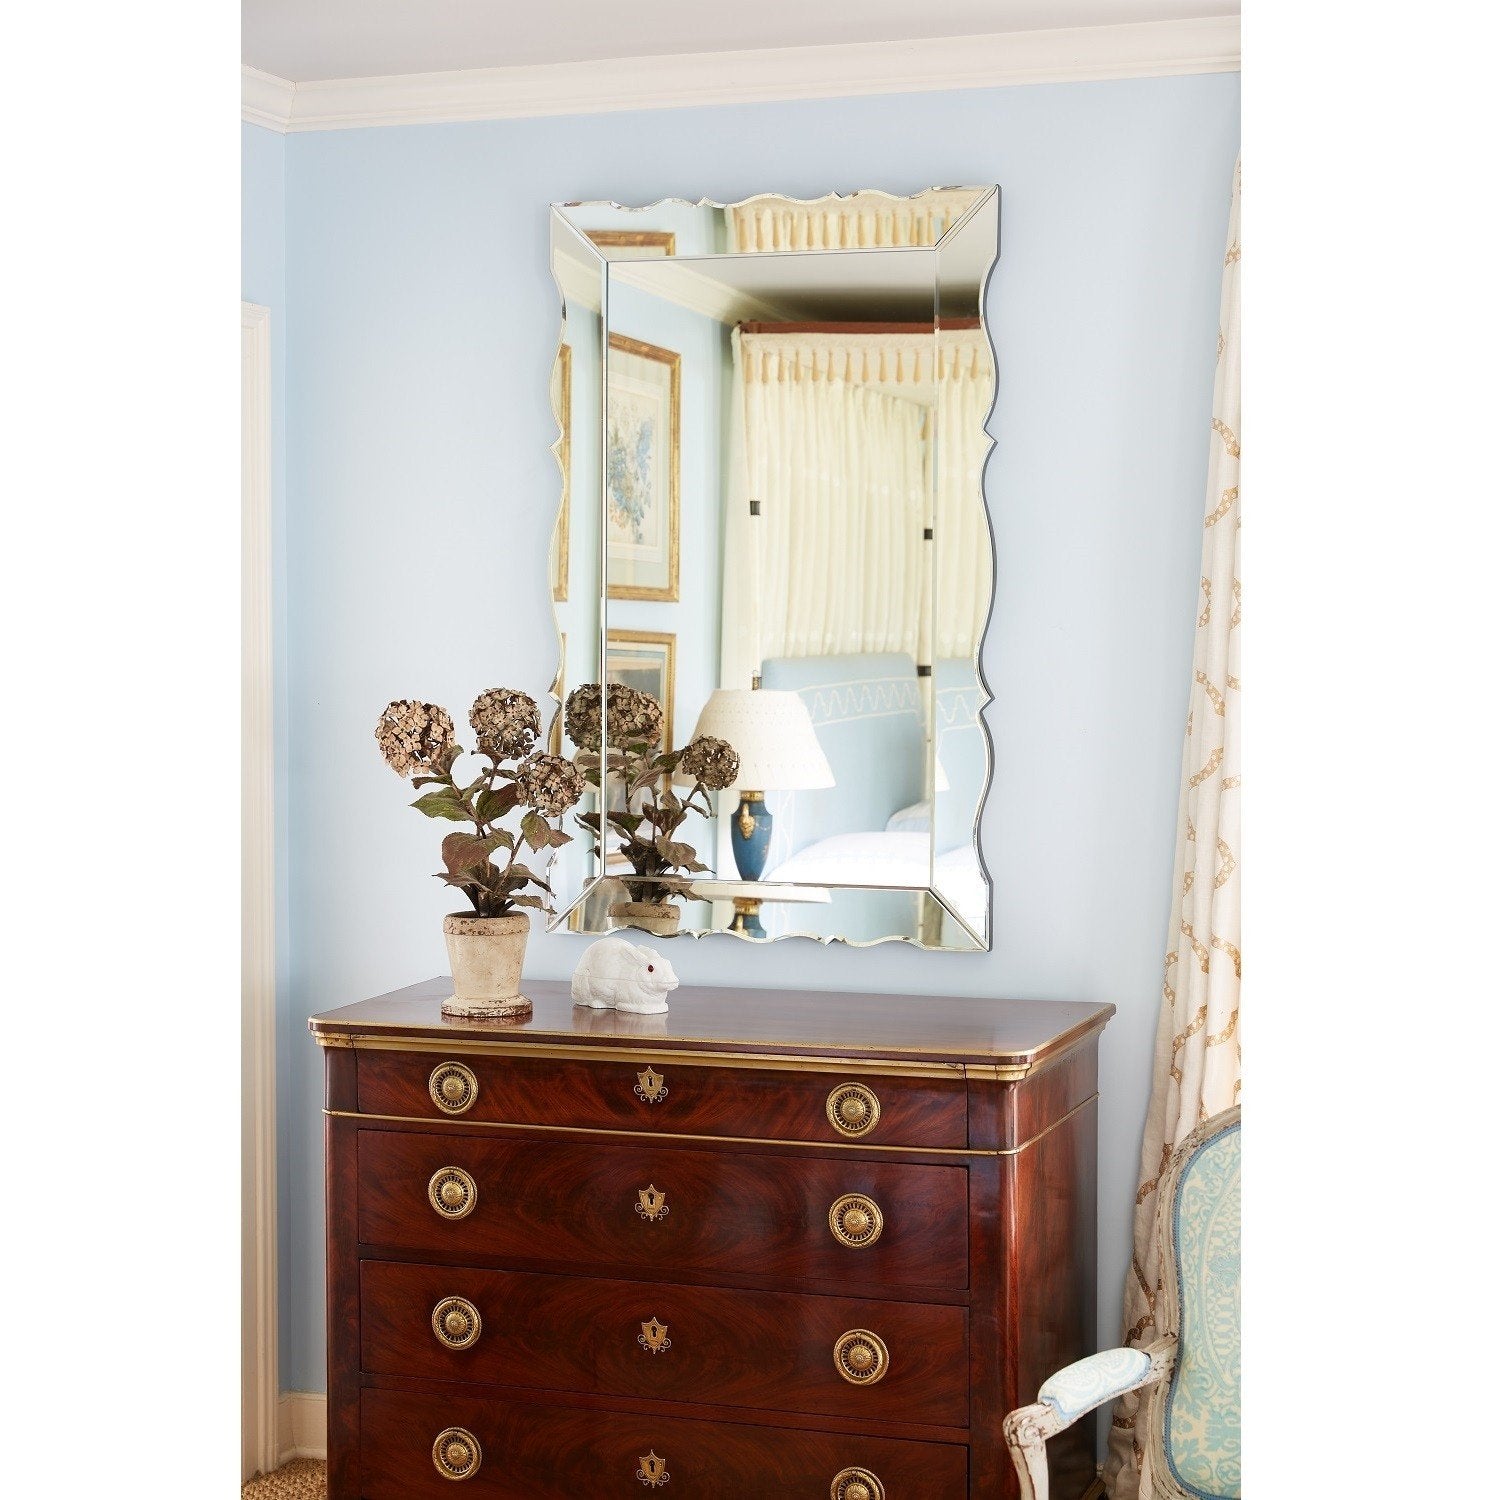 Fig Linens - Mirror Image Home - Morisot Mirror Framed Mirror by Bunny Williams - Lifestyle